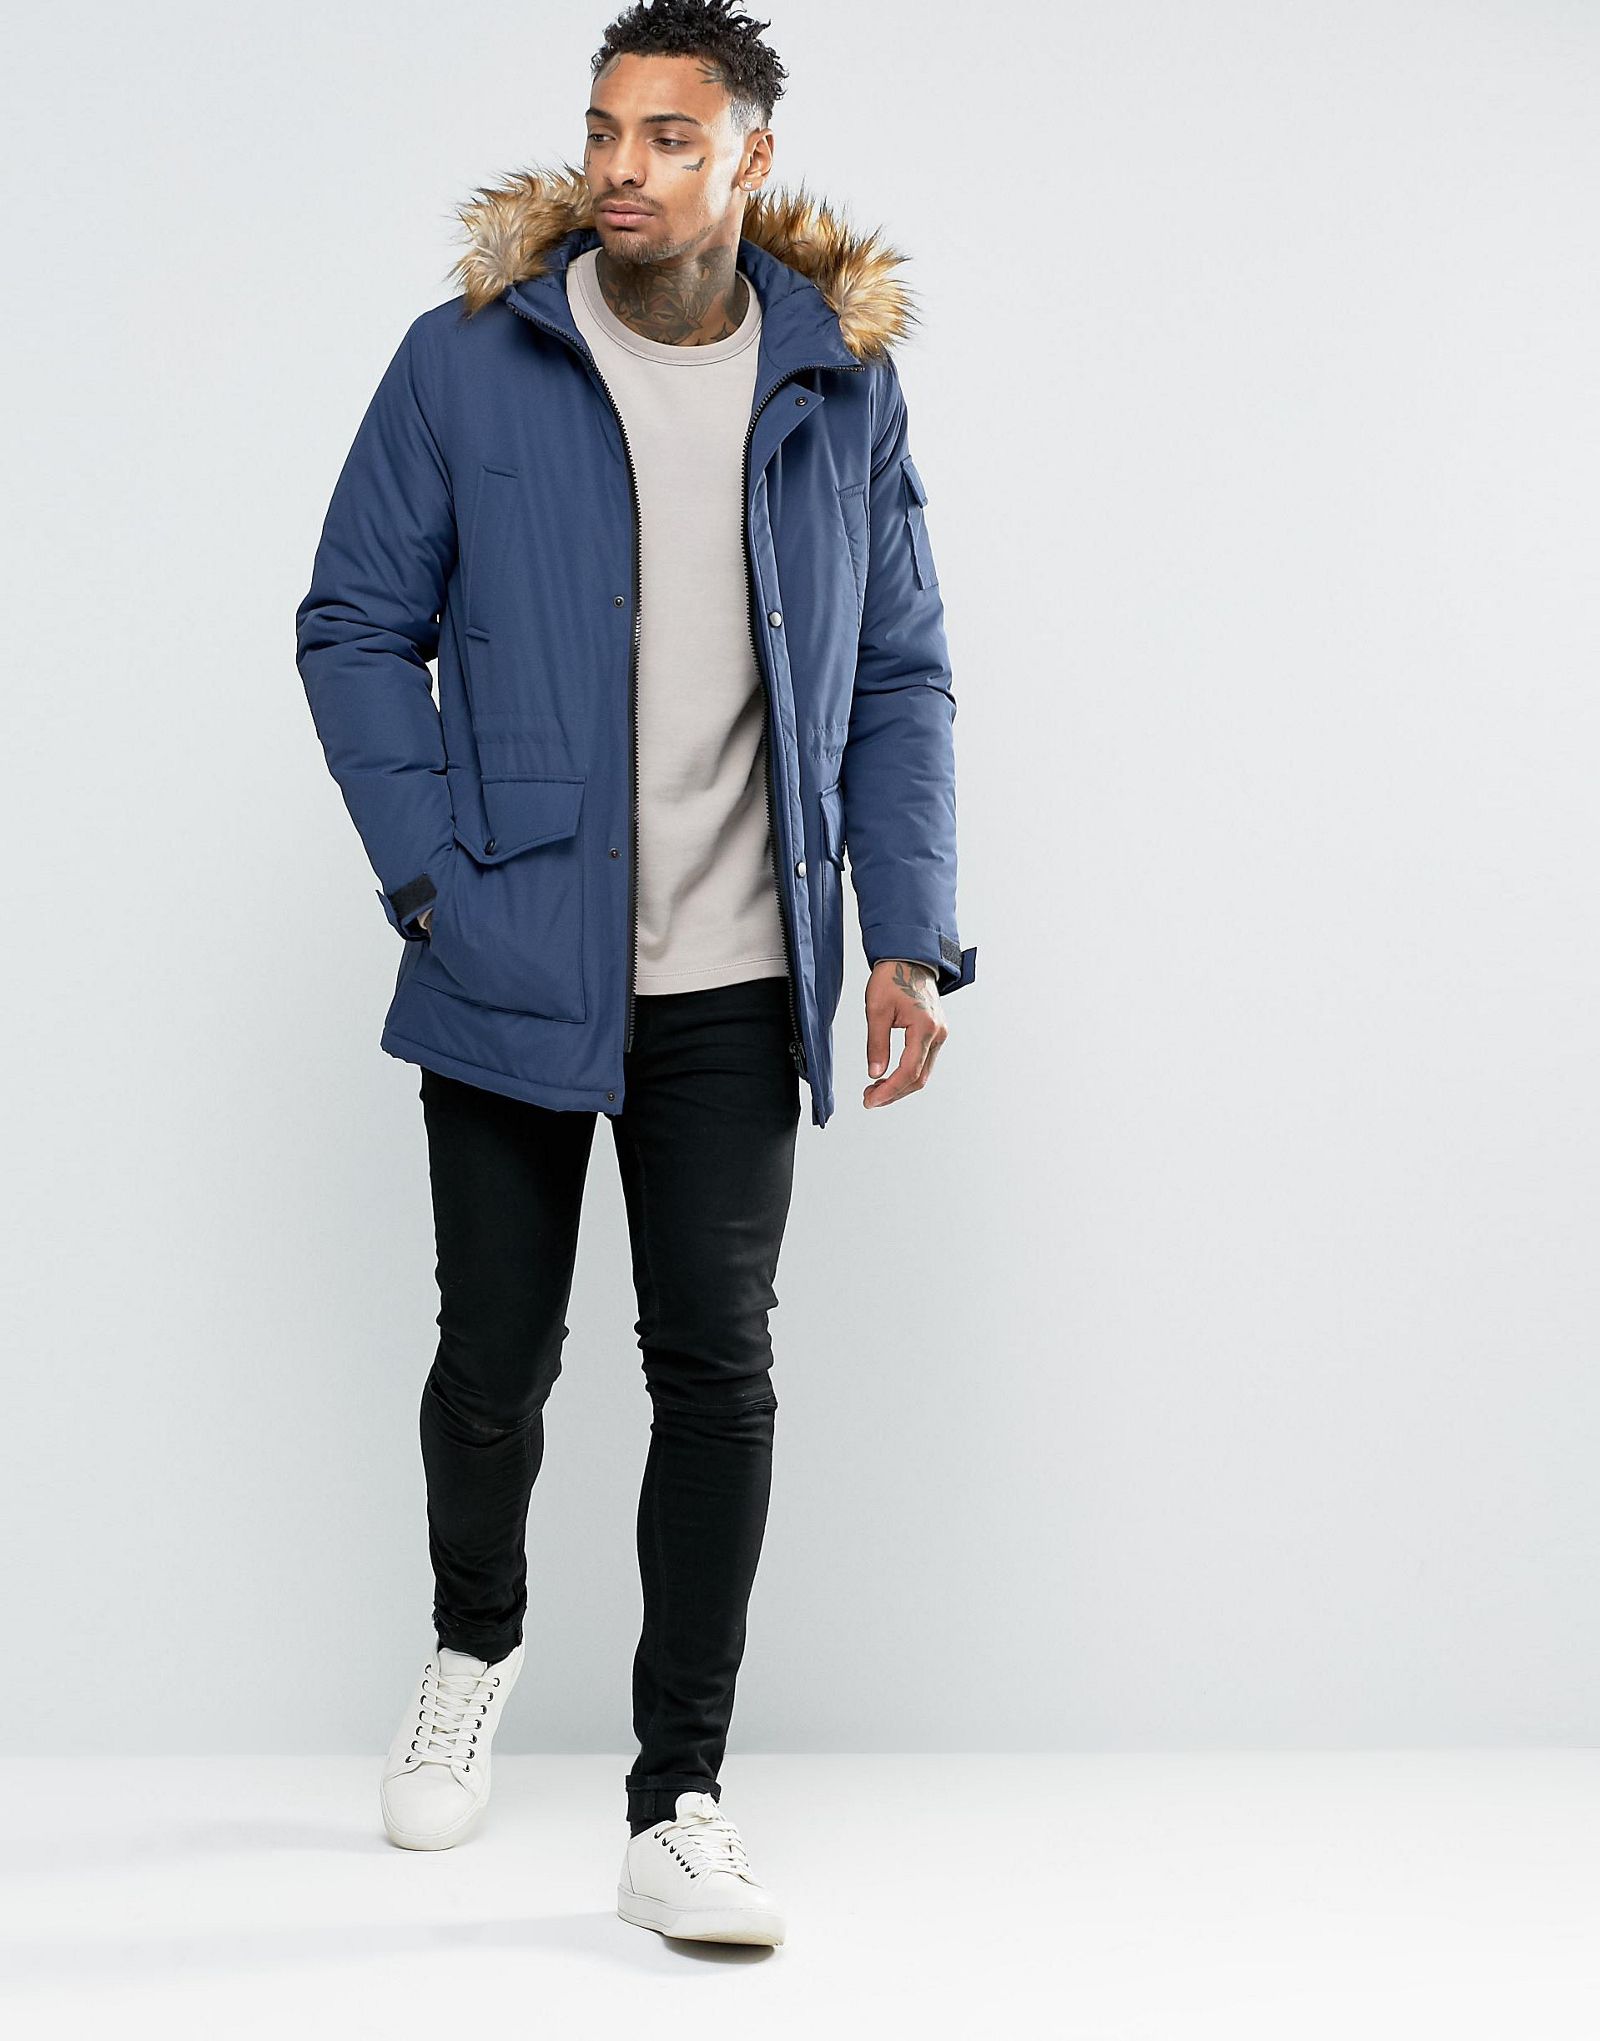 ASOS Parka Jacket In Navy With Faux Fur Trim